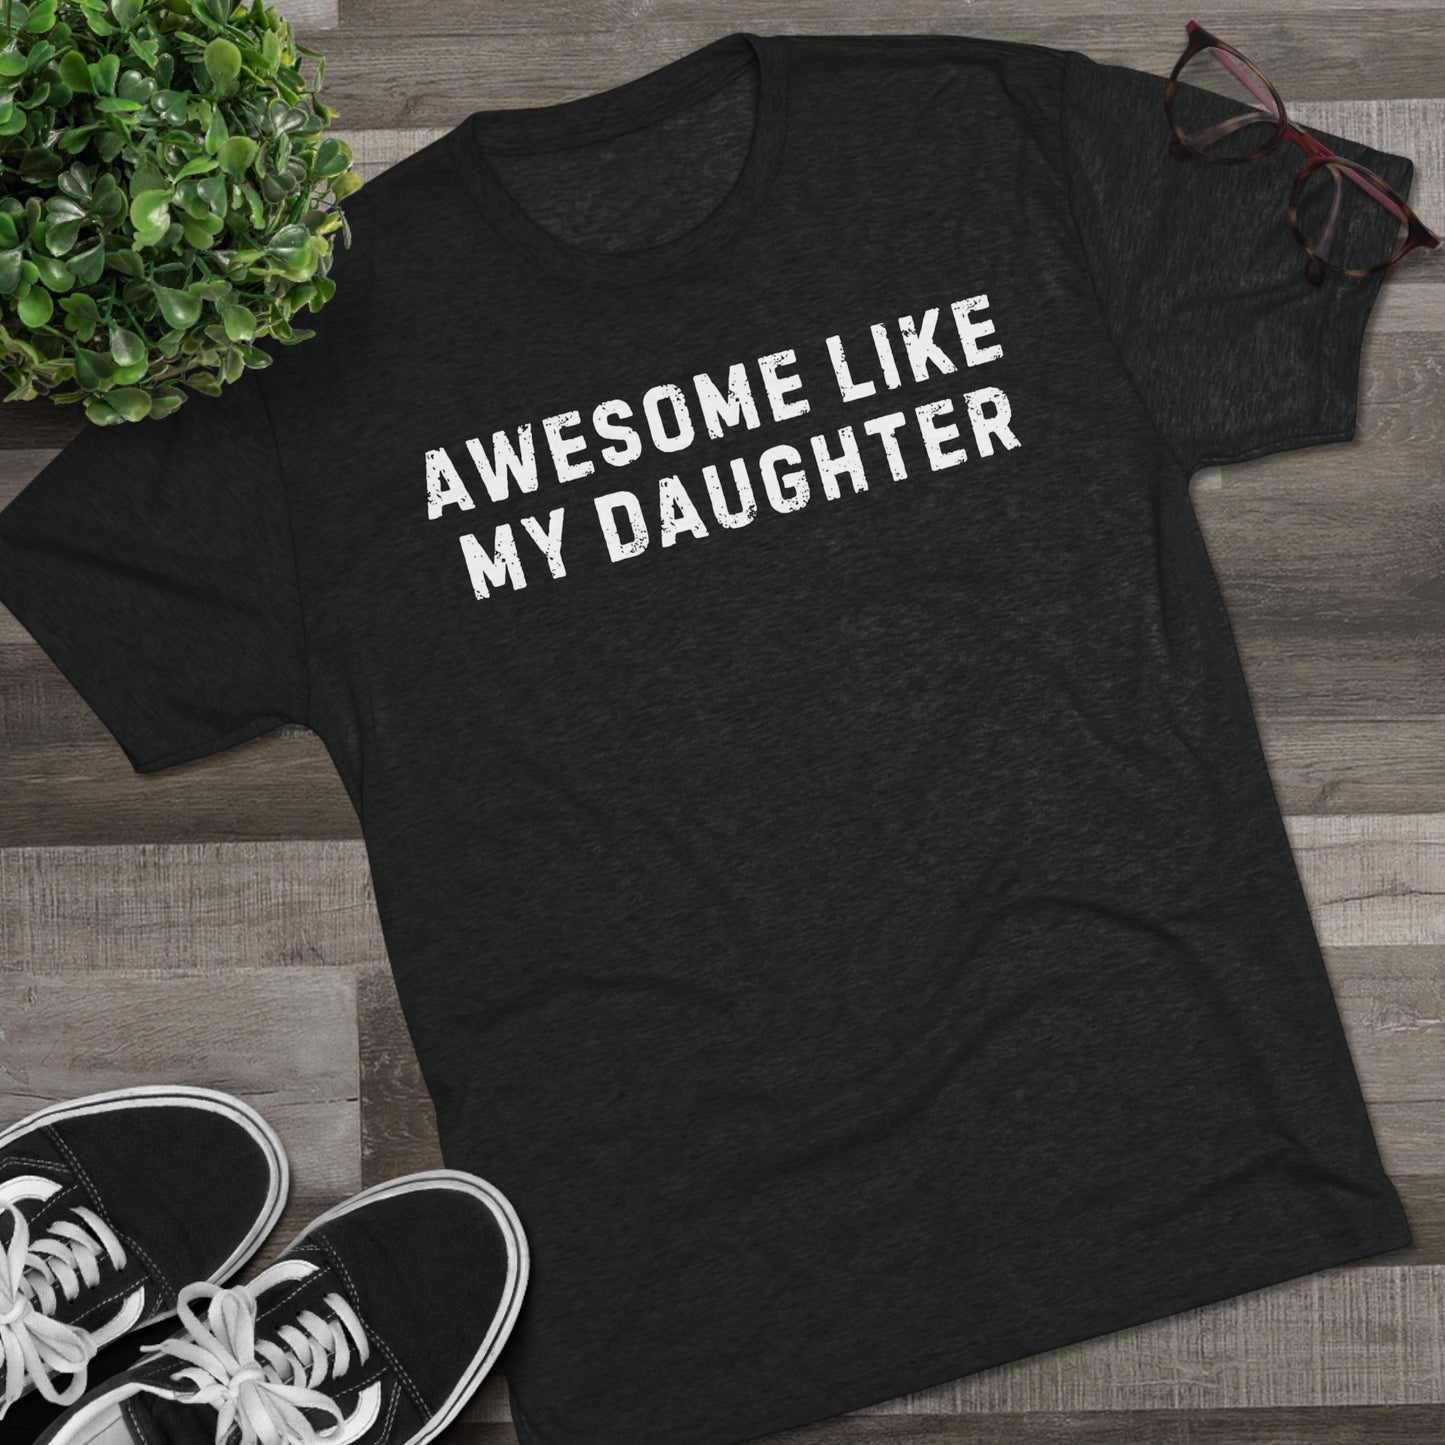 Awesome Like My Daughter T-Shirt - Ultra-Soft Tri-Blend, Regular Fit for Ultimate Comfort